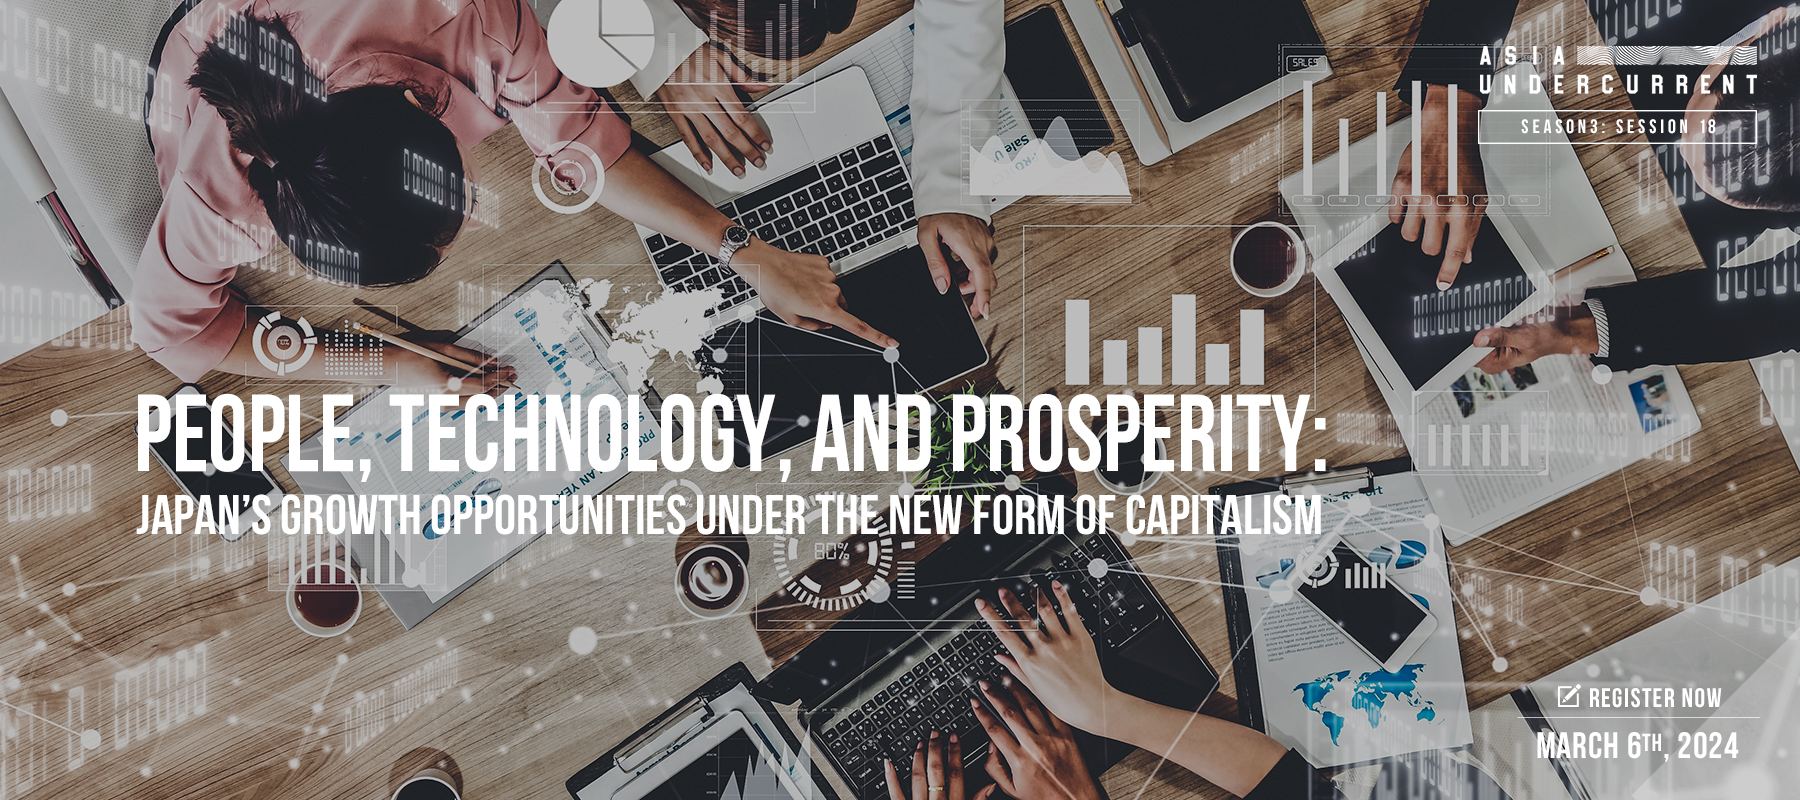 People, Technology, and Prosperity: Japan’s growth opportunities under the New Form of Capitalism